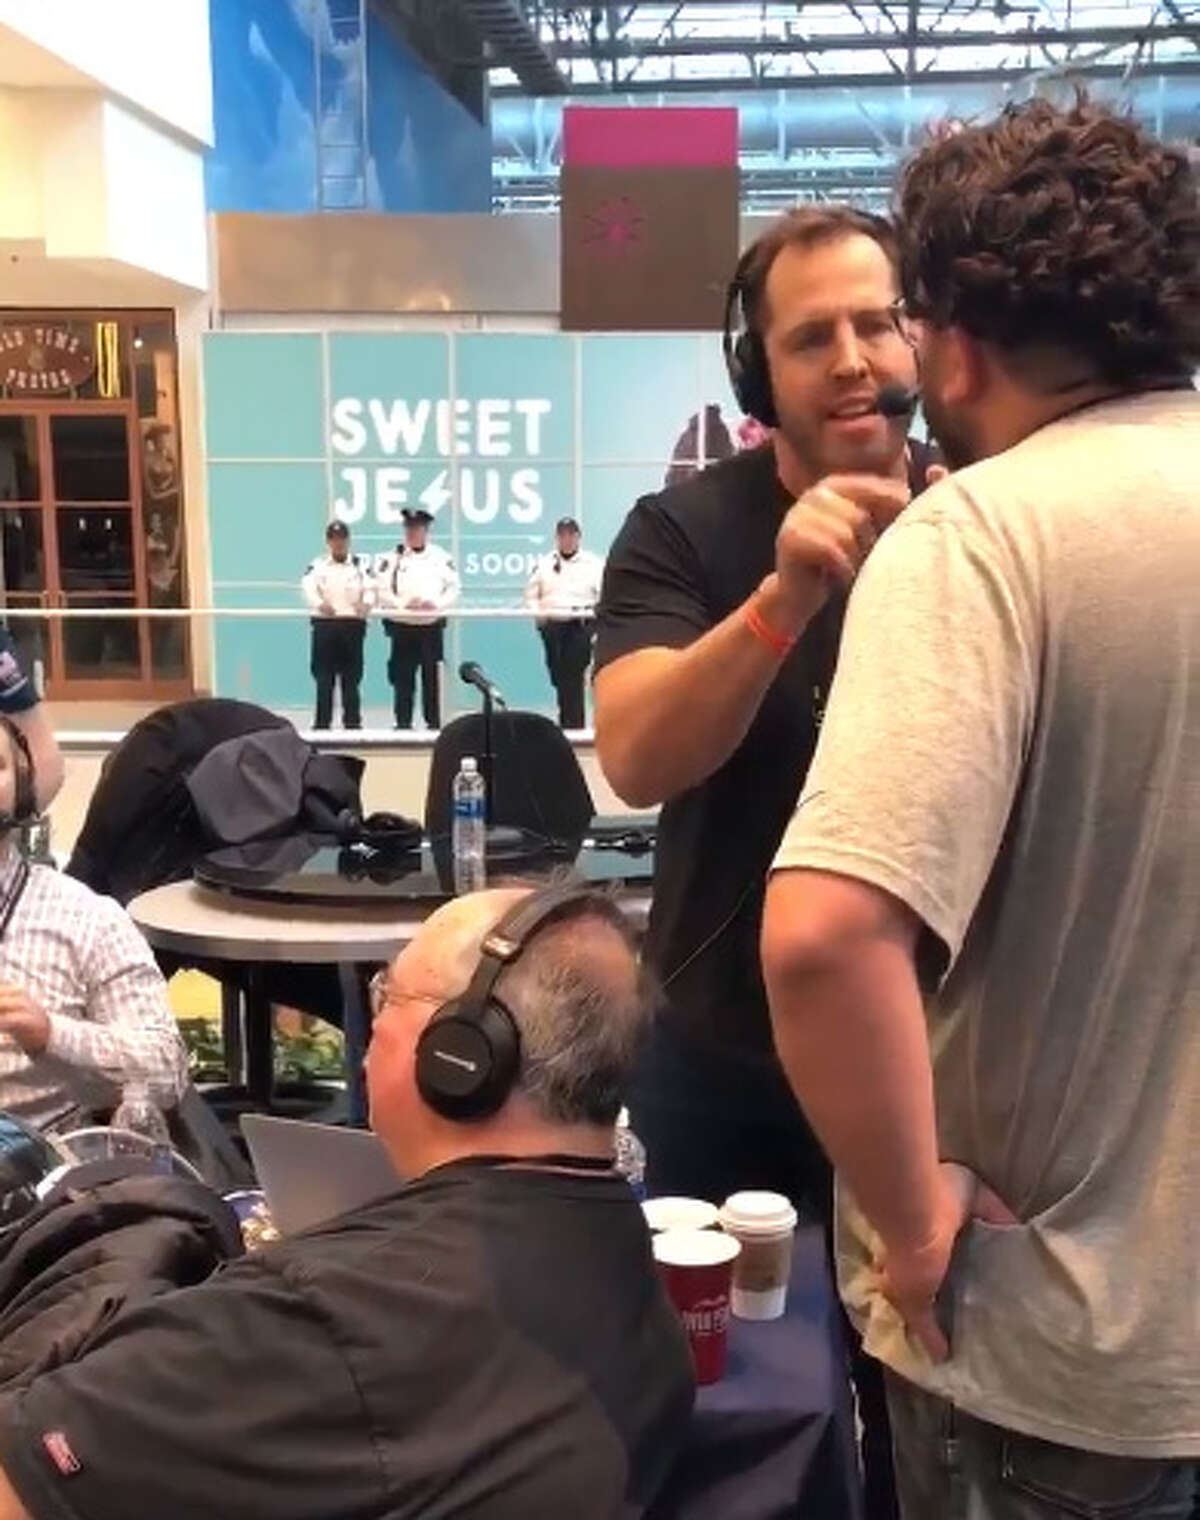 Rival Houston sports talk radio hosts Seth Payne and Josh Innes (left) argue live on the air from Super Bowl's Radio Row on Wednesday, Jan. 31, 2018. The Houston Chronicle's John McClain is sitting on the left, waiting impatiently.